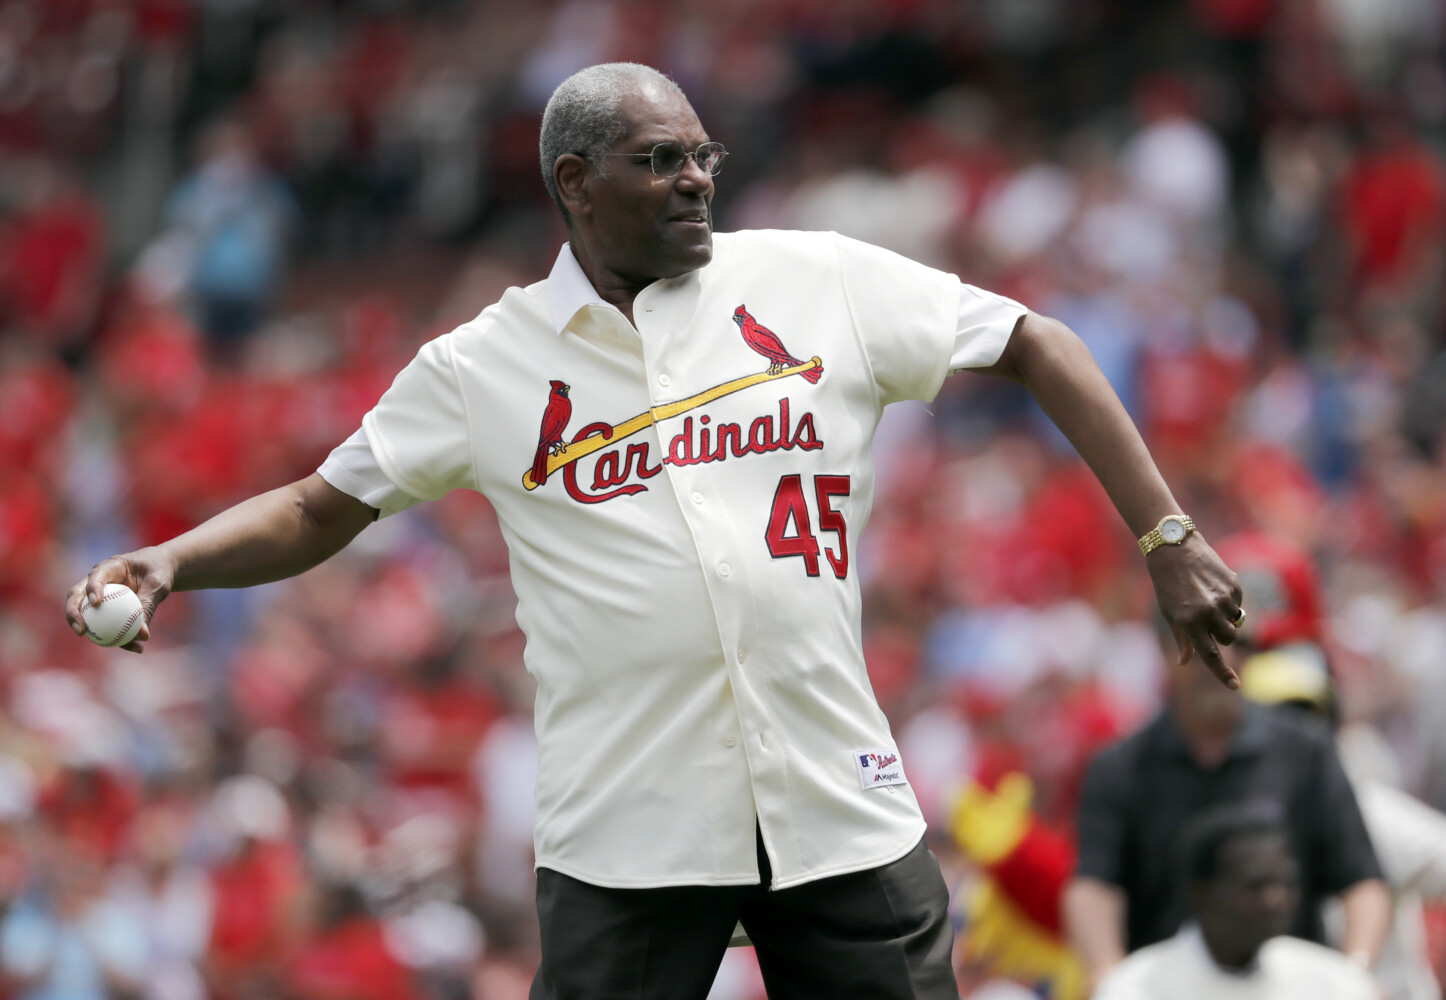 No one more competitive than Cardinals legend Gibson